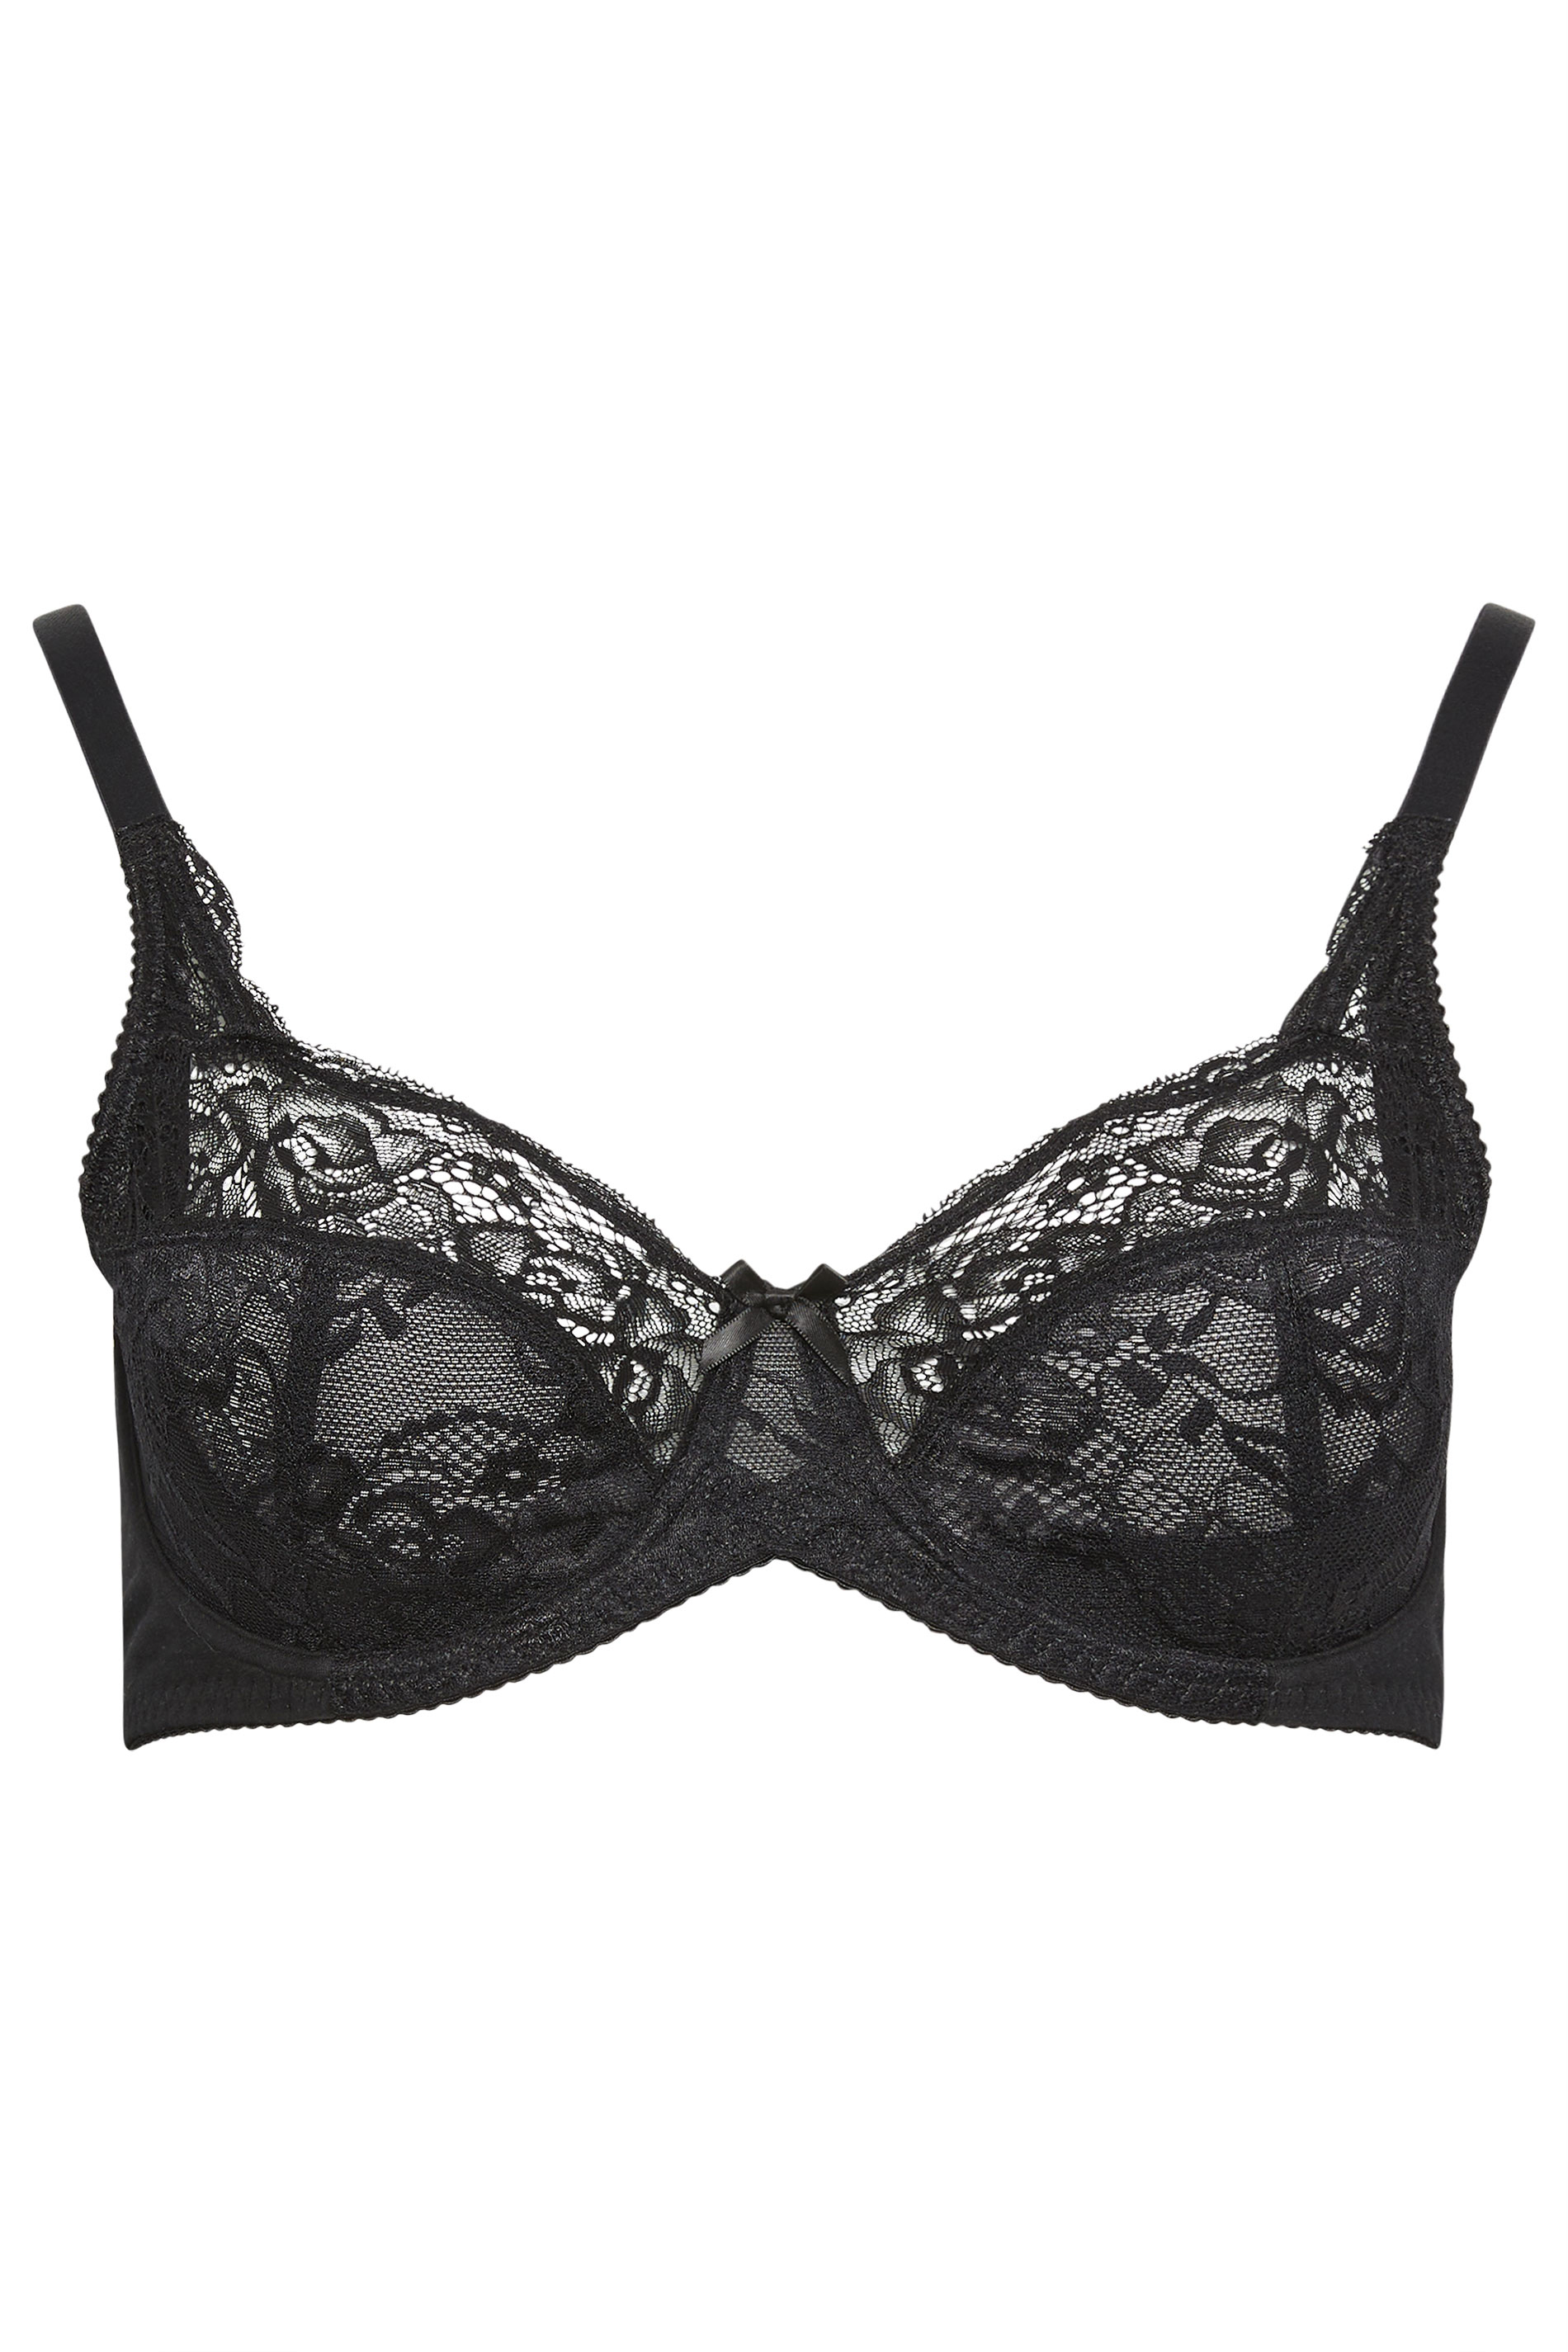 BM underwired non paded embroiderd lace black bra Size 42D #G